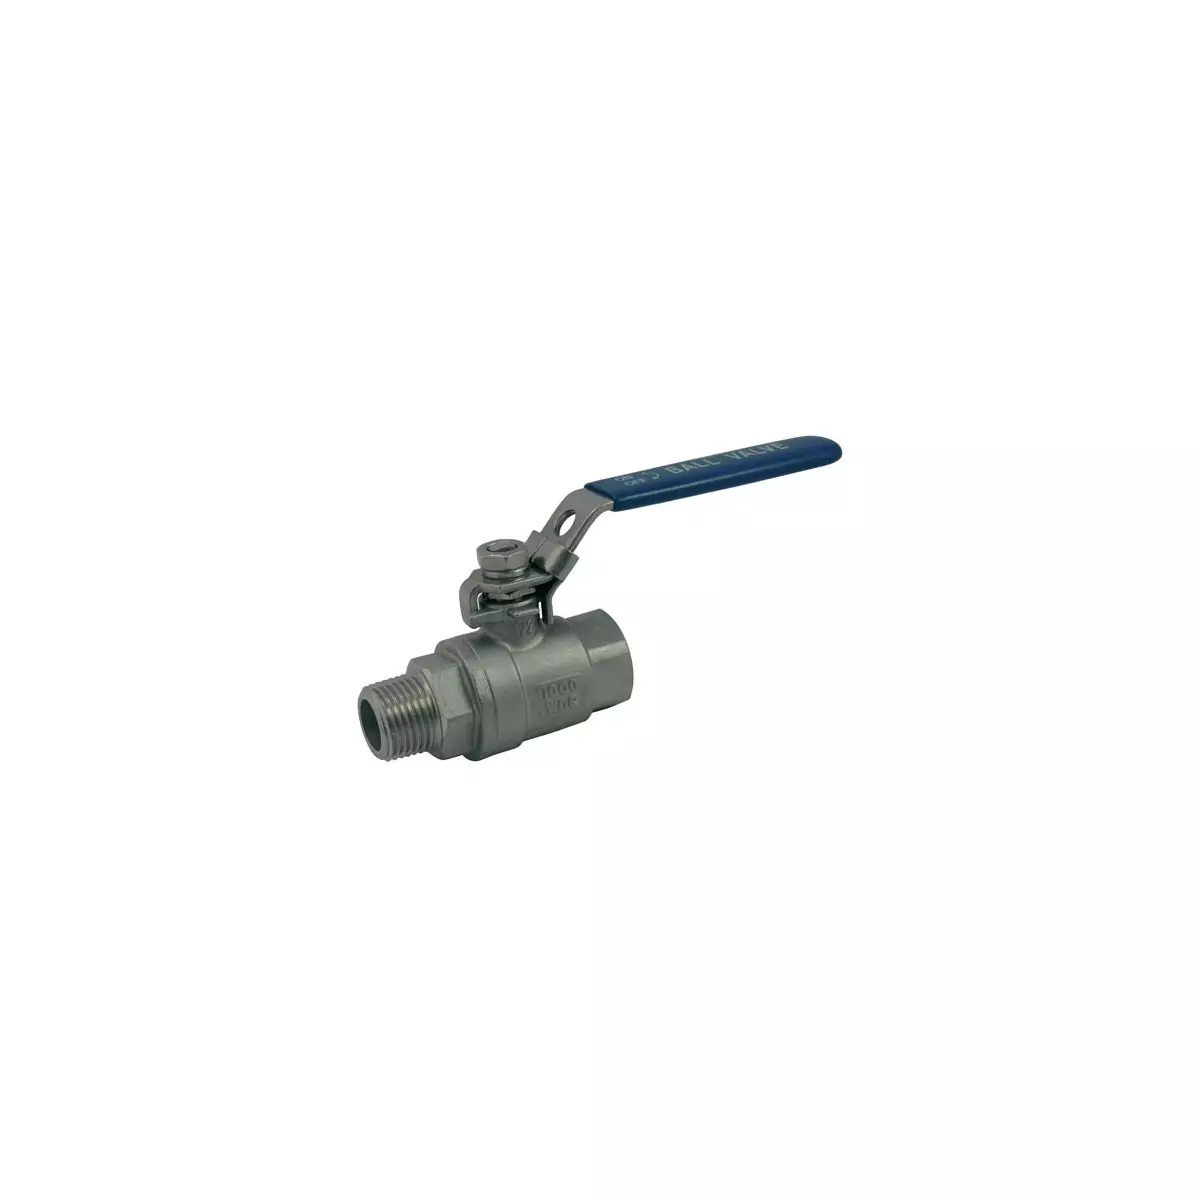 Ball valve 2 pieces - 316 stainless steel body - male female